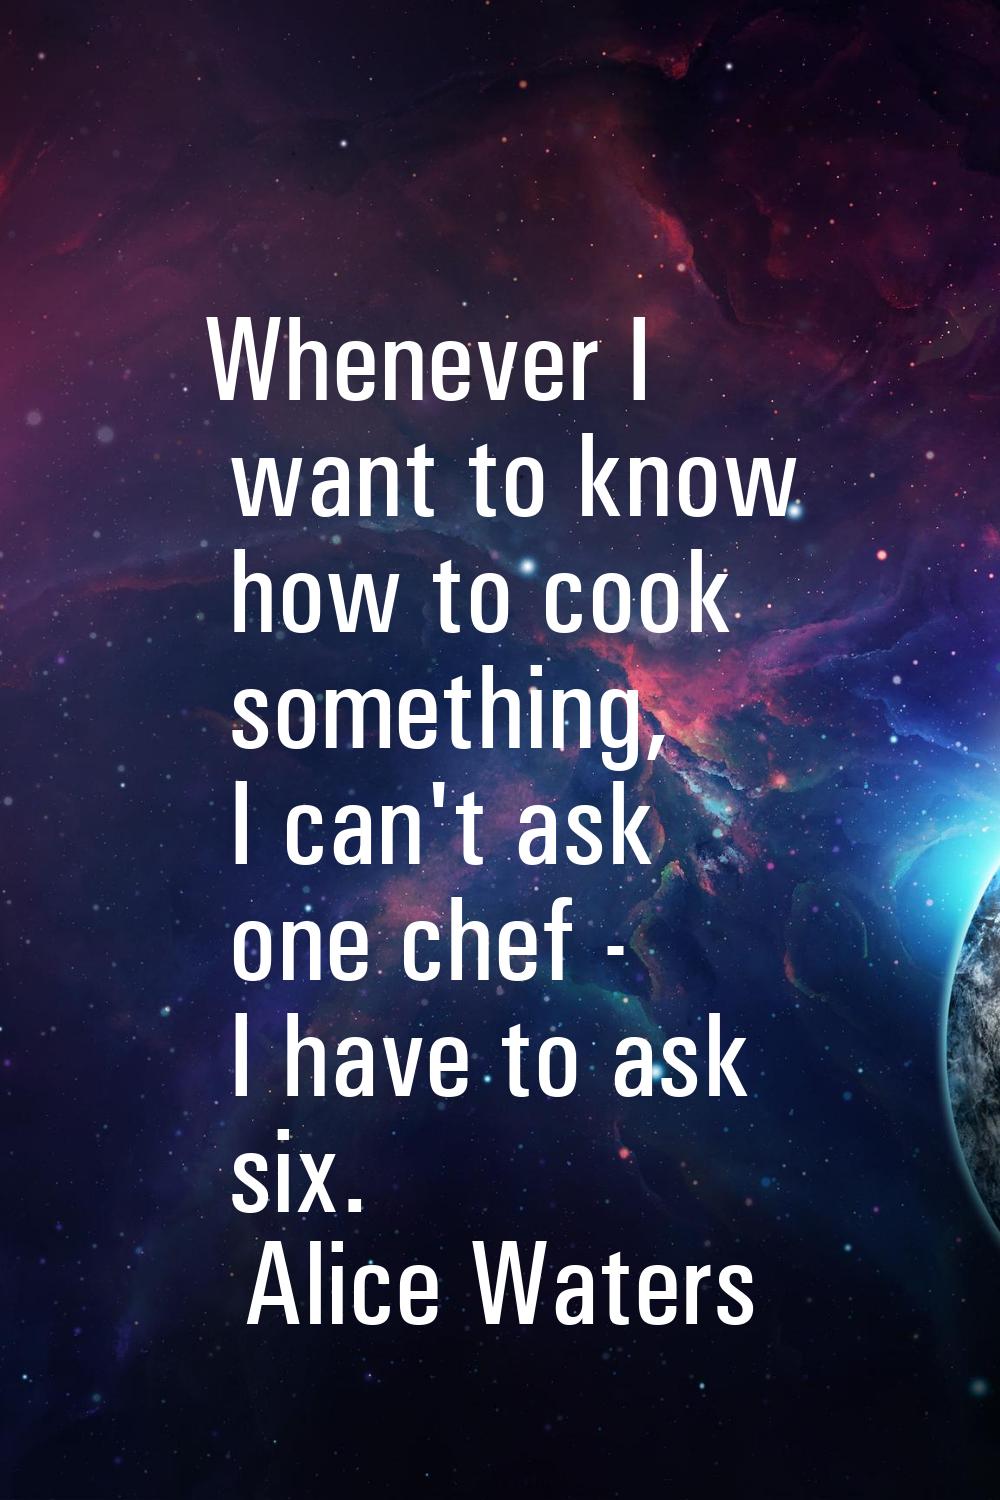 Whenever I want to know how to cook something, I can't ask one chef - I have to ask six.